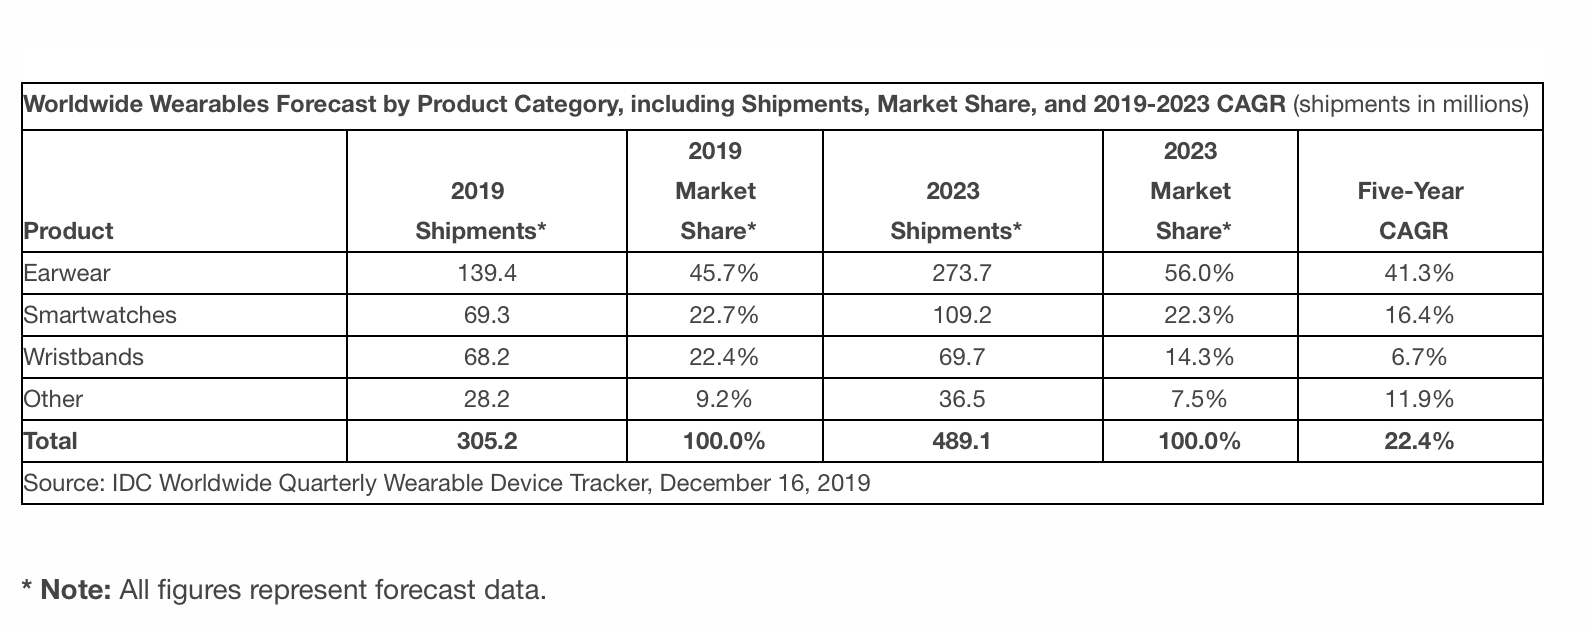 Wearables on track to ship 305.2 million units in 2019